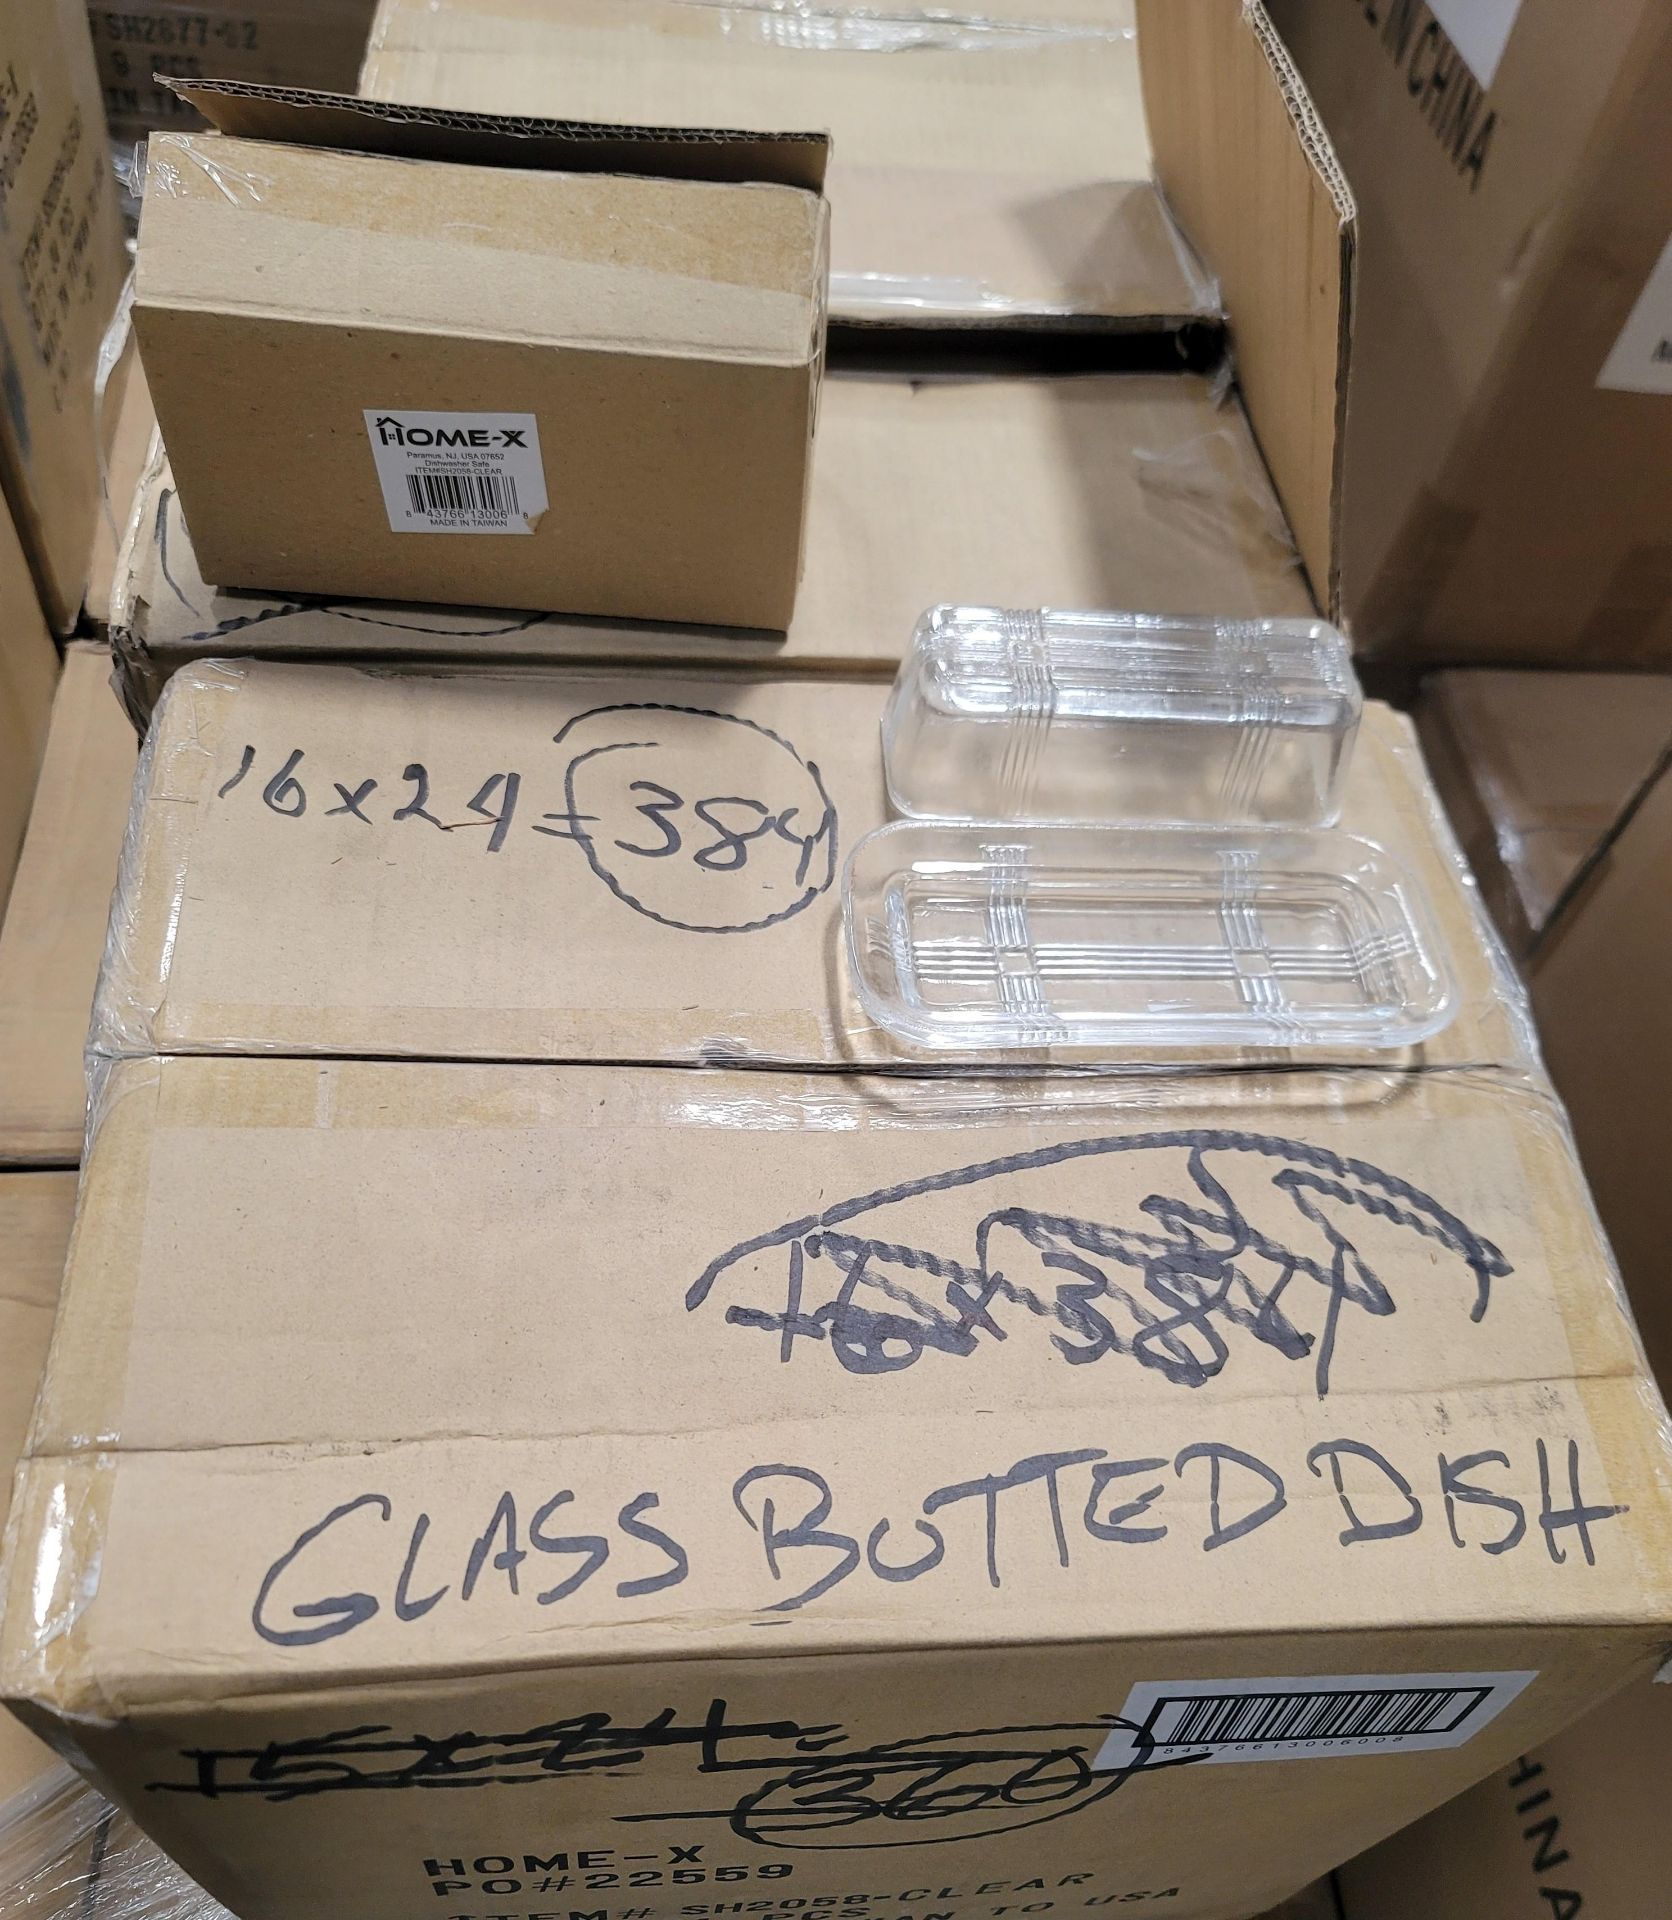 LOT - PALLET OF (384) GLASS BUTTER DISH, (16 CASES/24 PER CASE) - Image 2 of 4